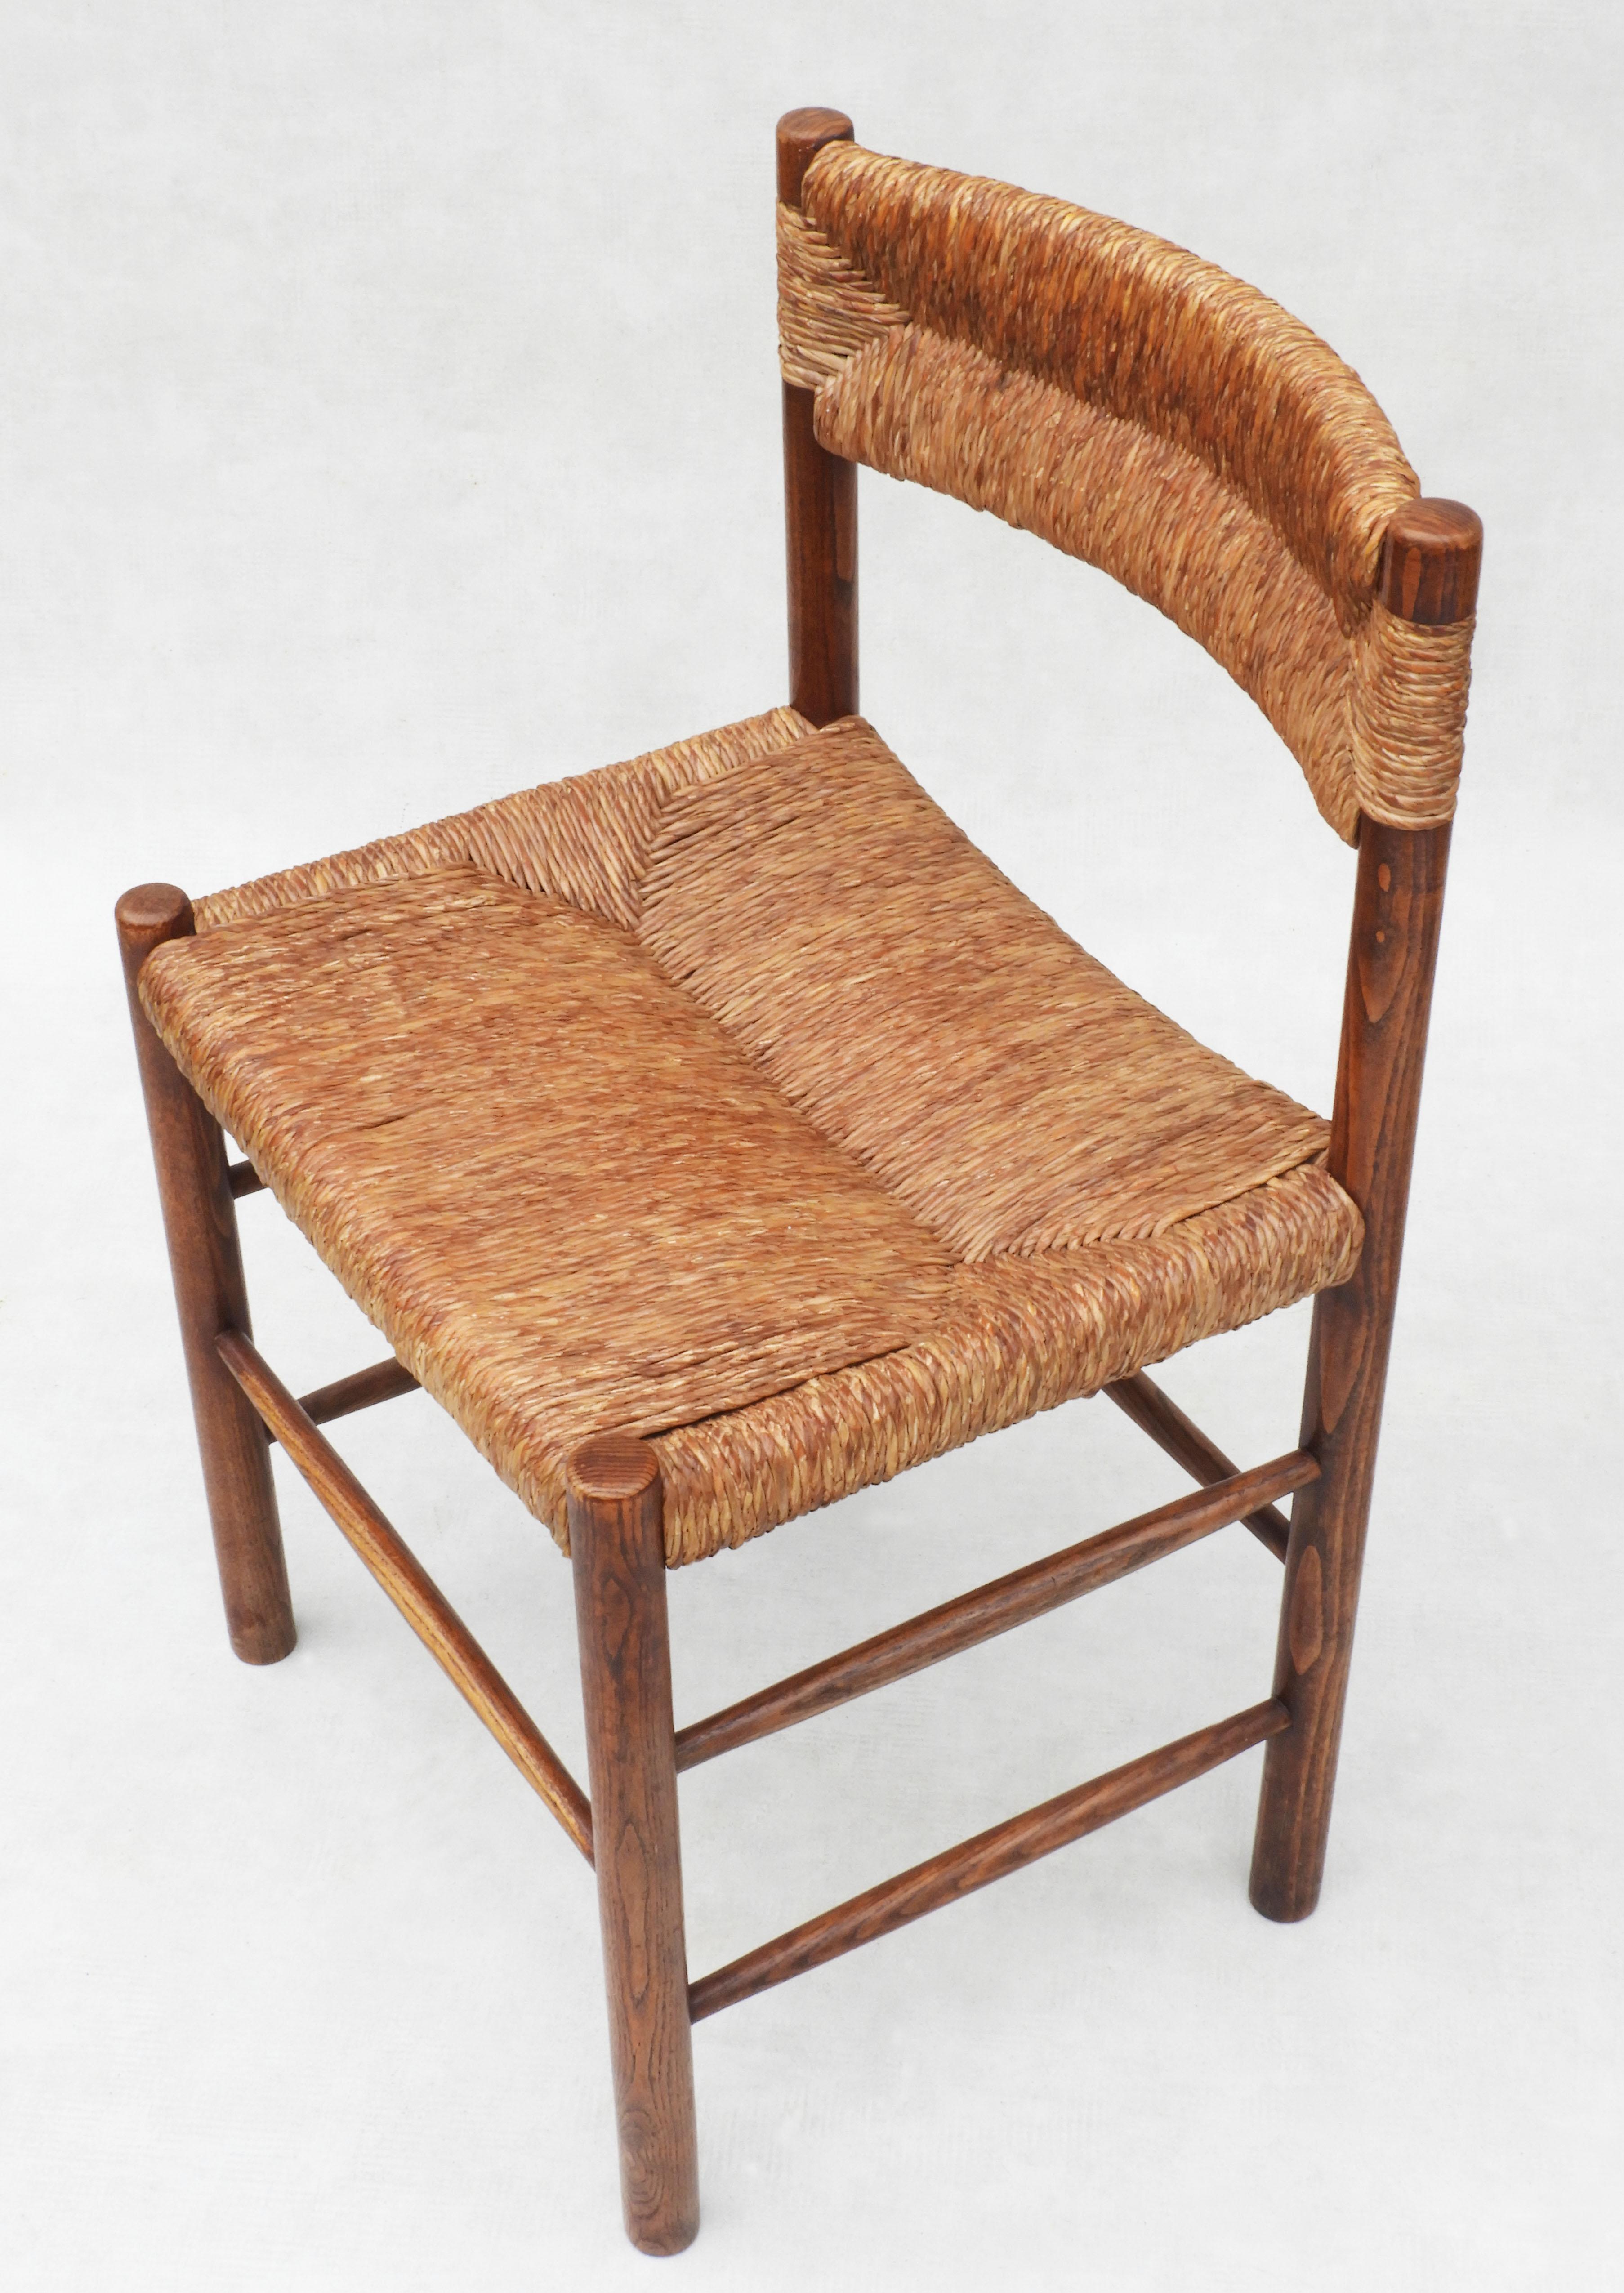 20th Century Pair of Dordogne Chairs by Charlotte Perriande for Robert Sentou France, 1960s